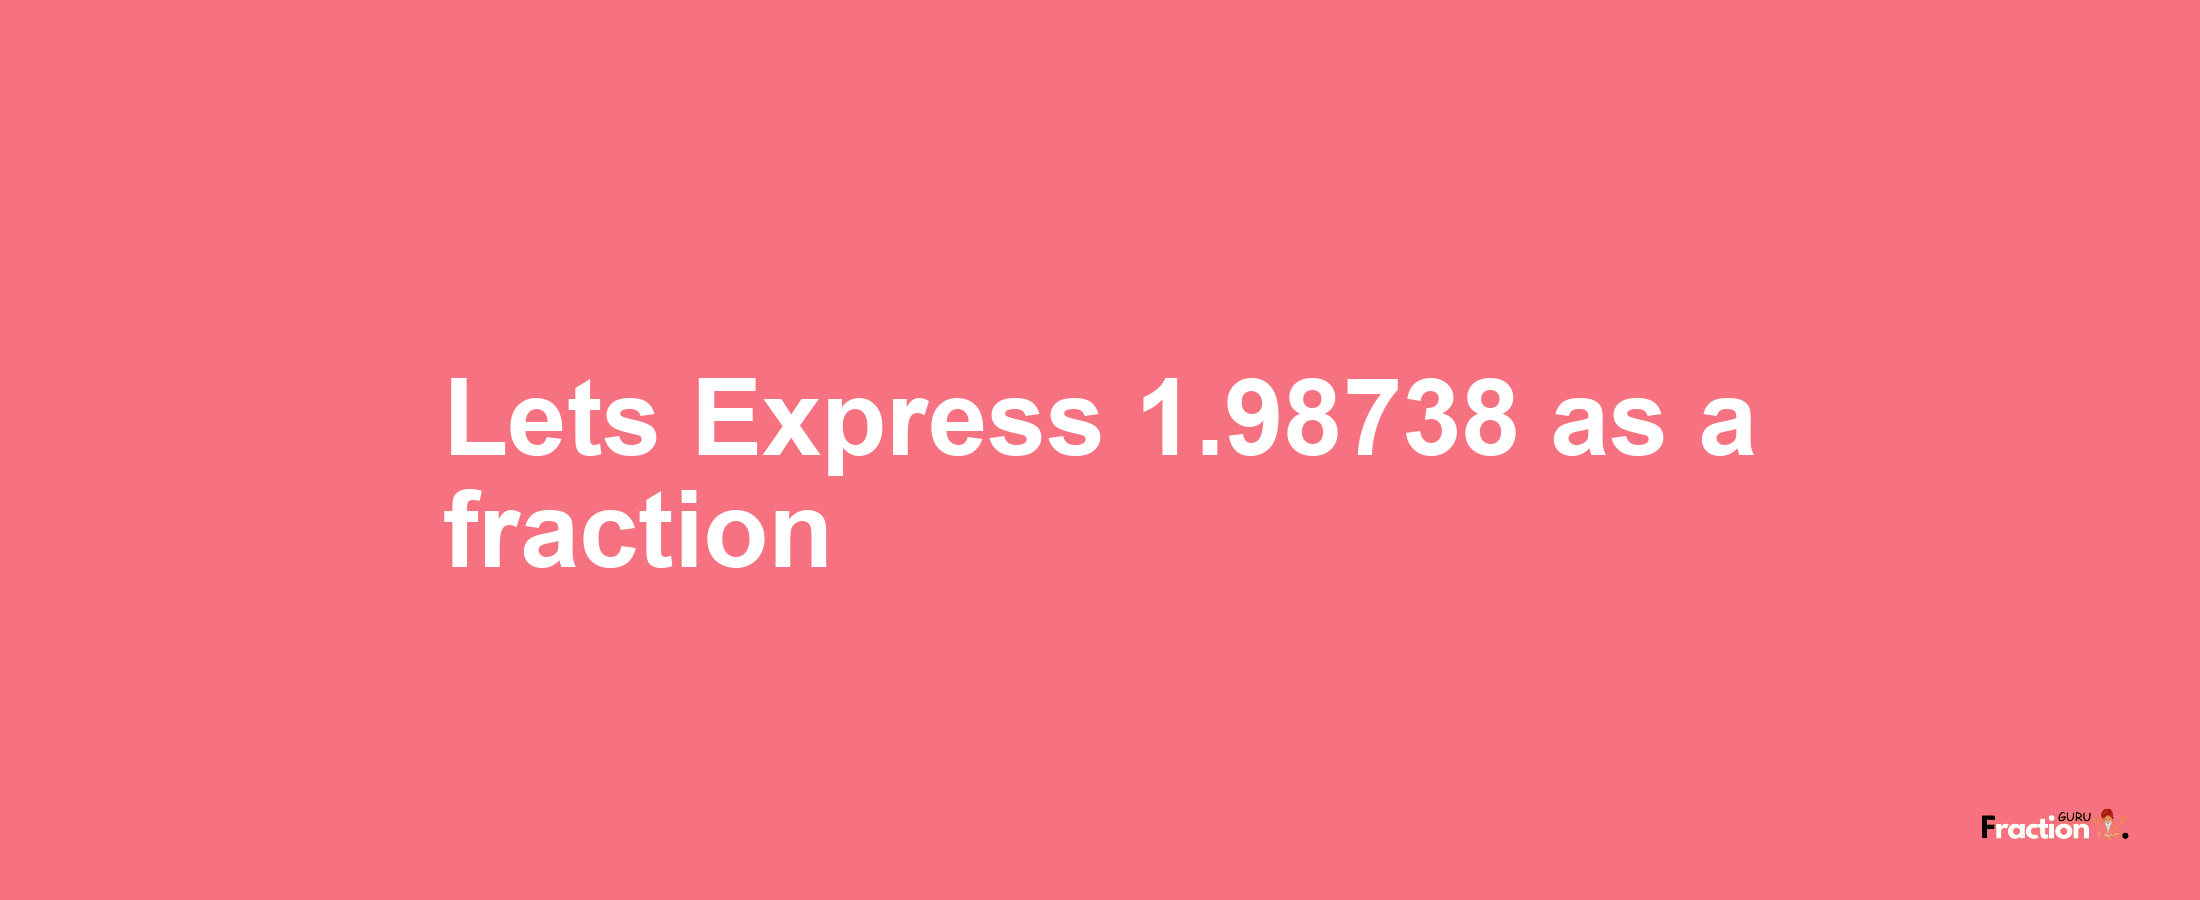 Lets Express 1.98738 as afraction